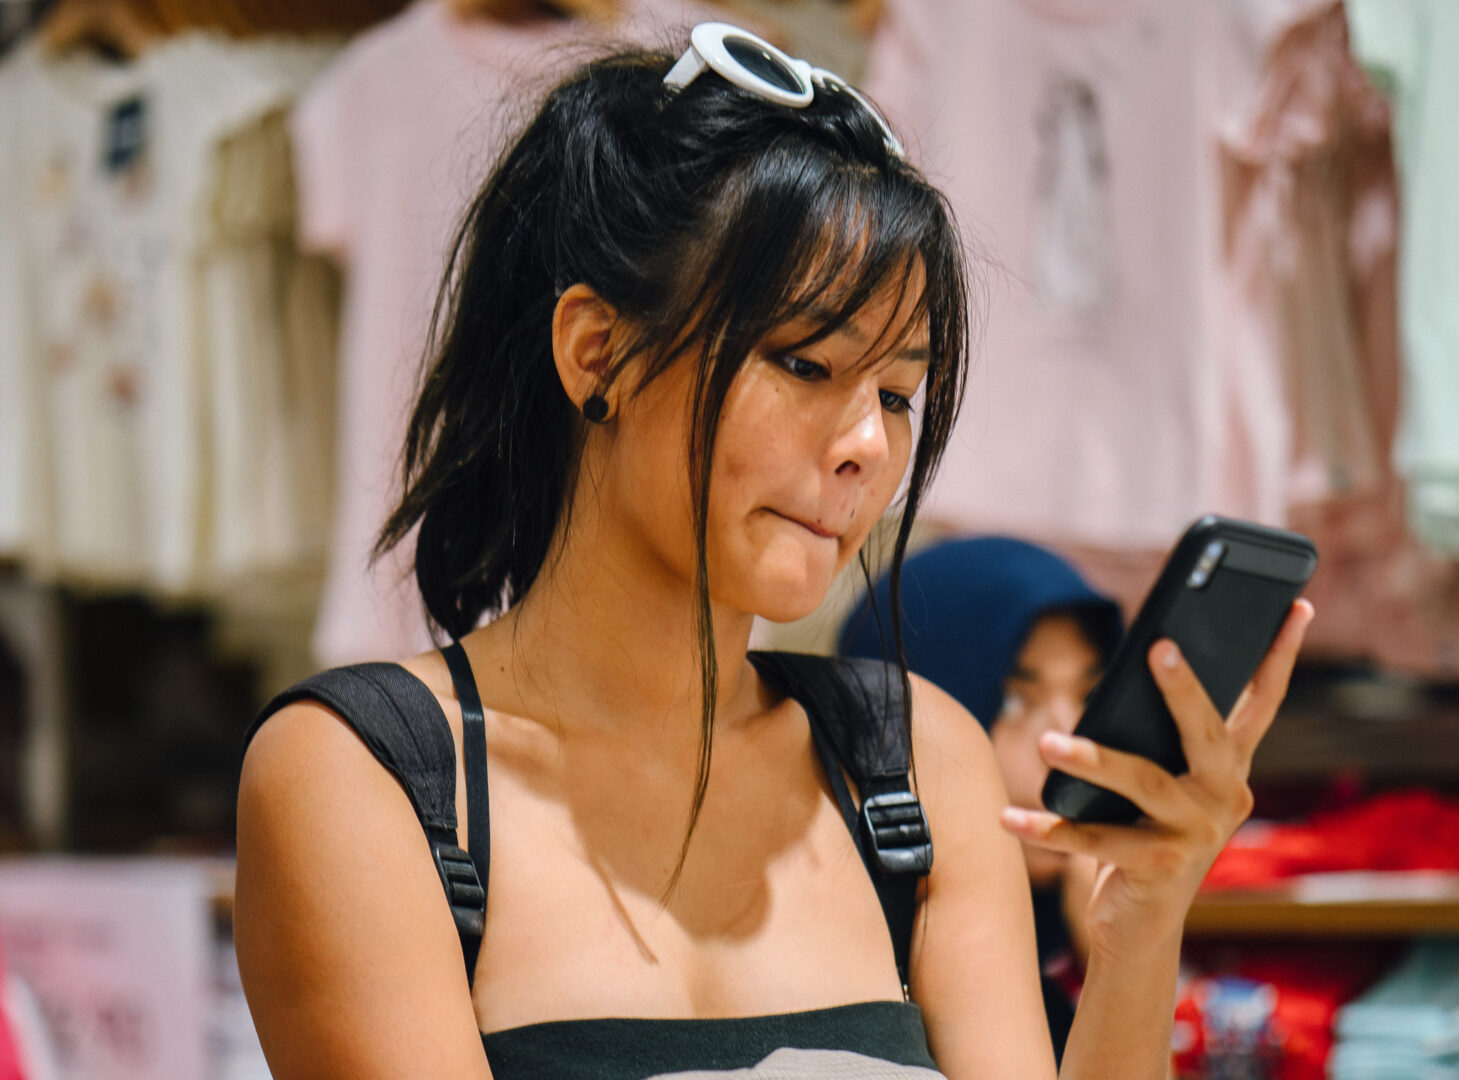 A woman with a backpack on and sunglasses on top of her head looks down on her phone. Her expression is neutral.